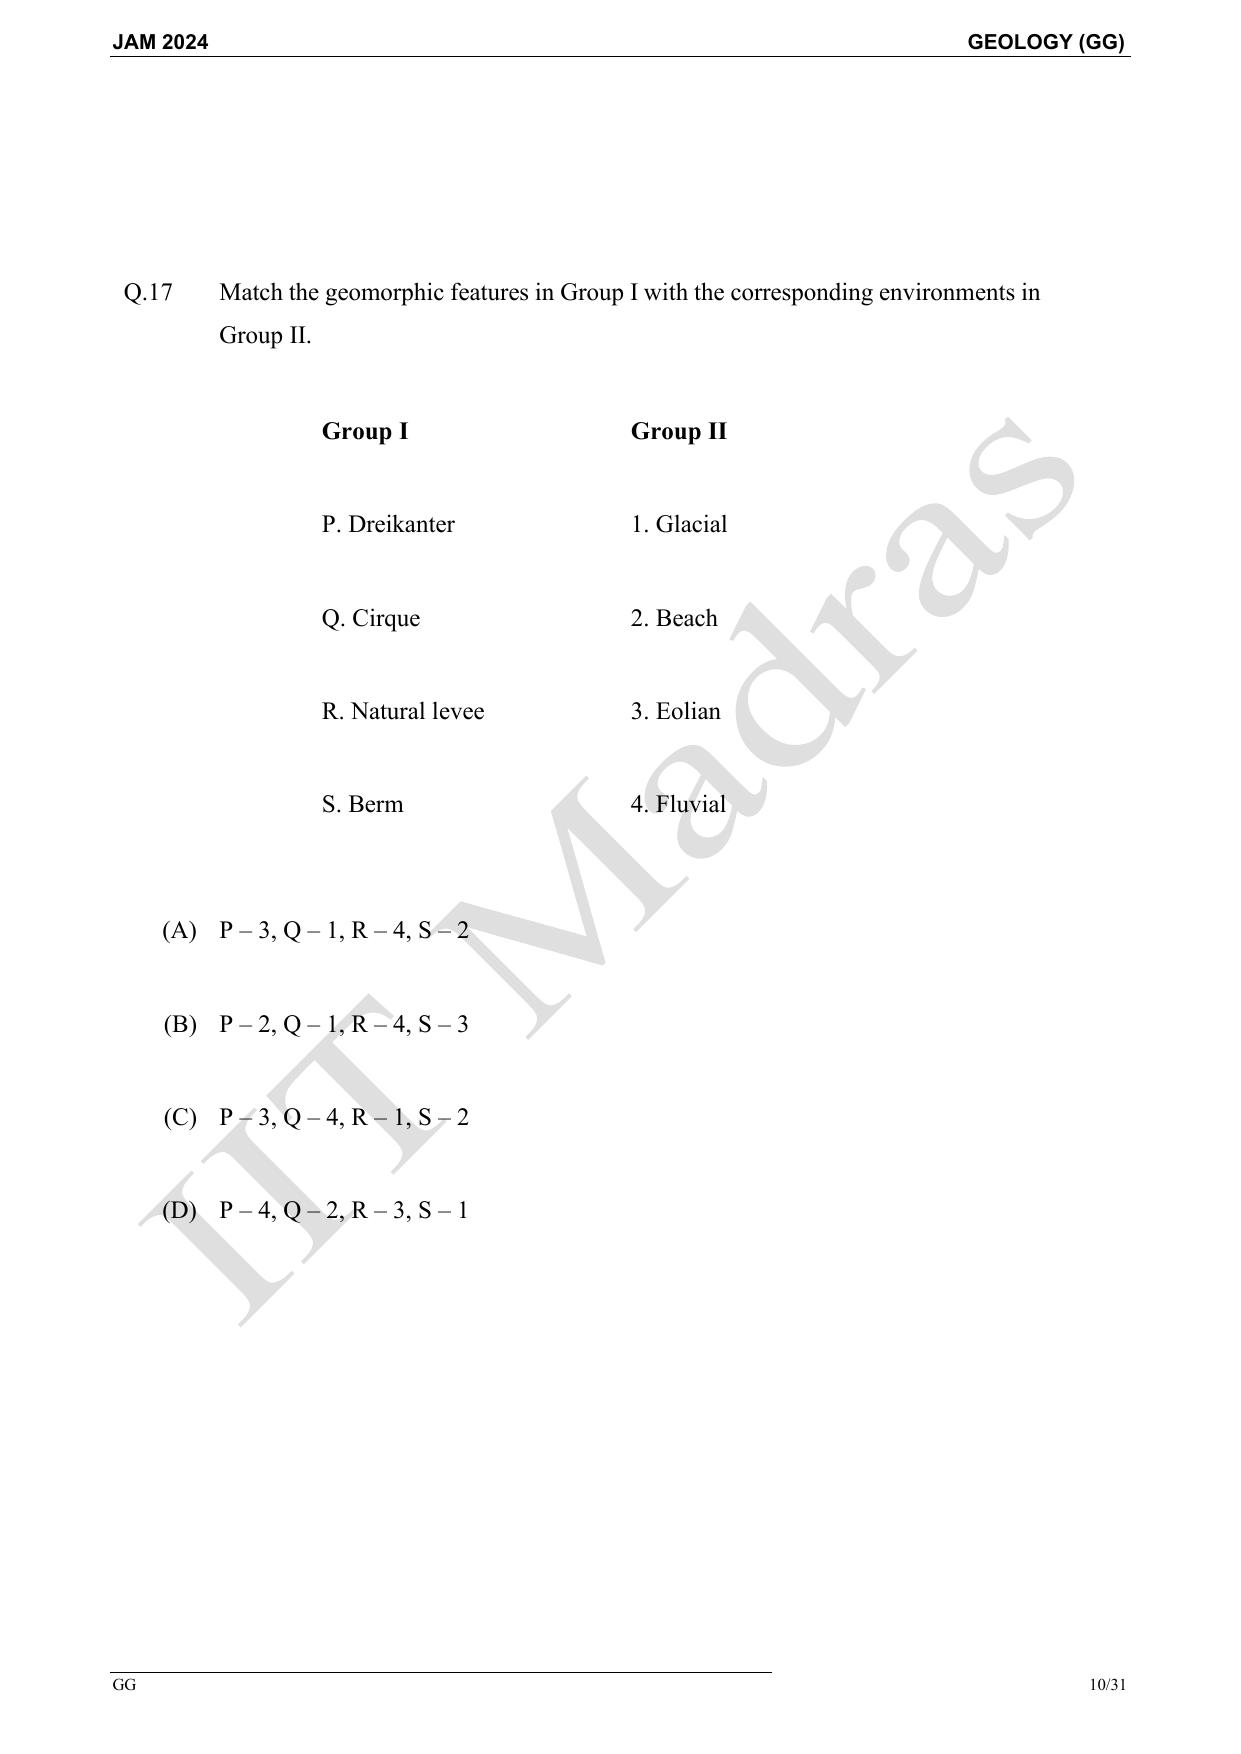 IIT JAM 2024 Geology (GG) Master Question Paper - Page 10